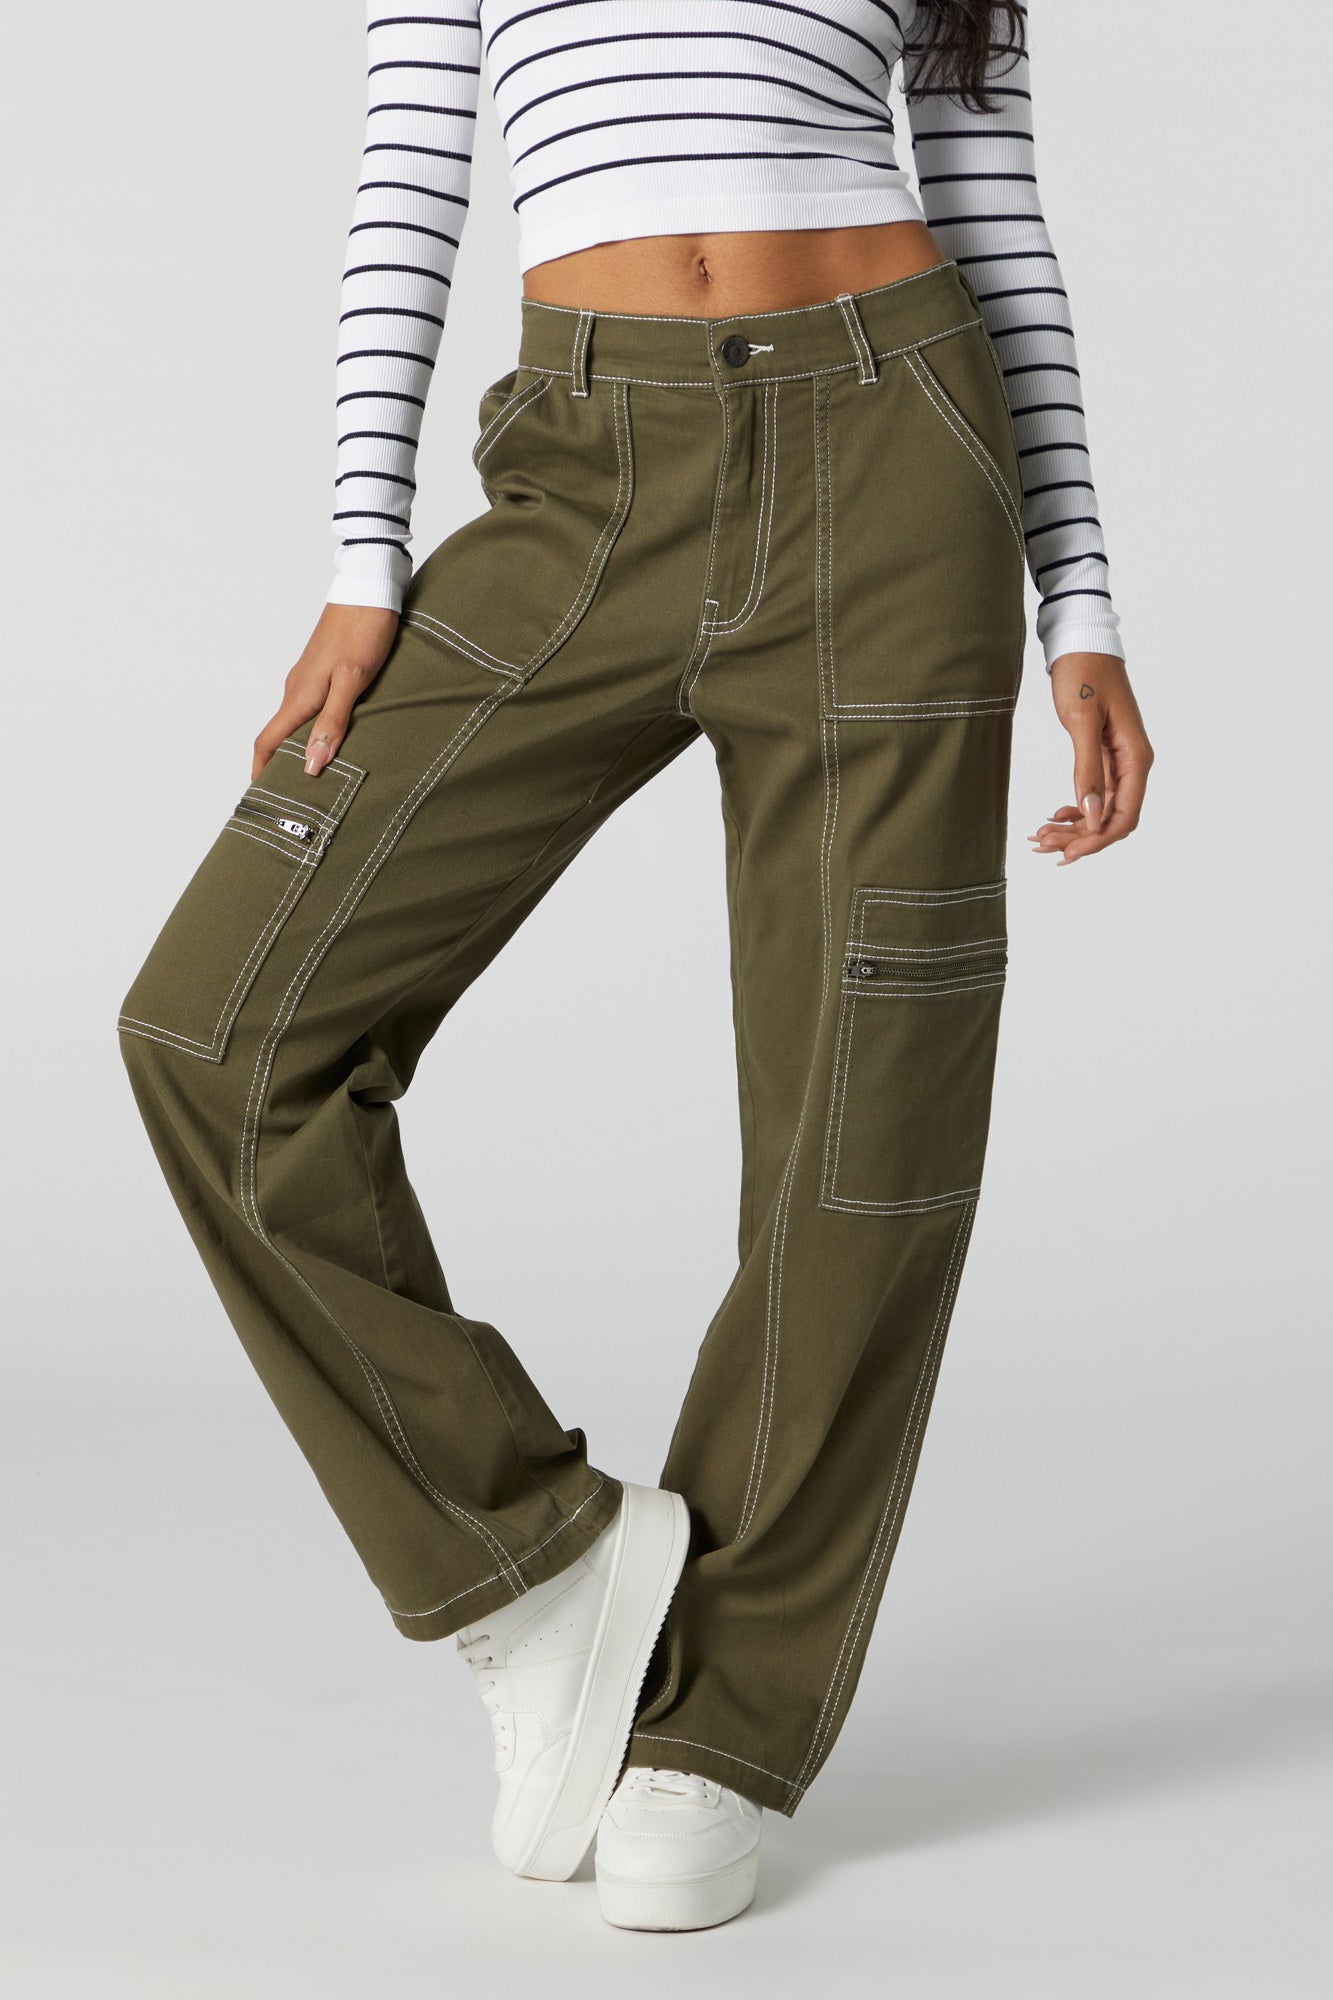 Straight Pants with 2 Zipper Pockets